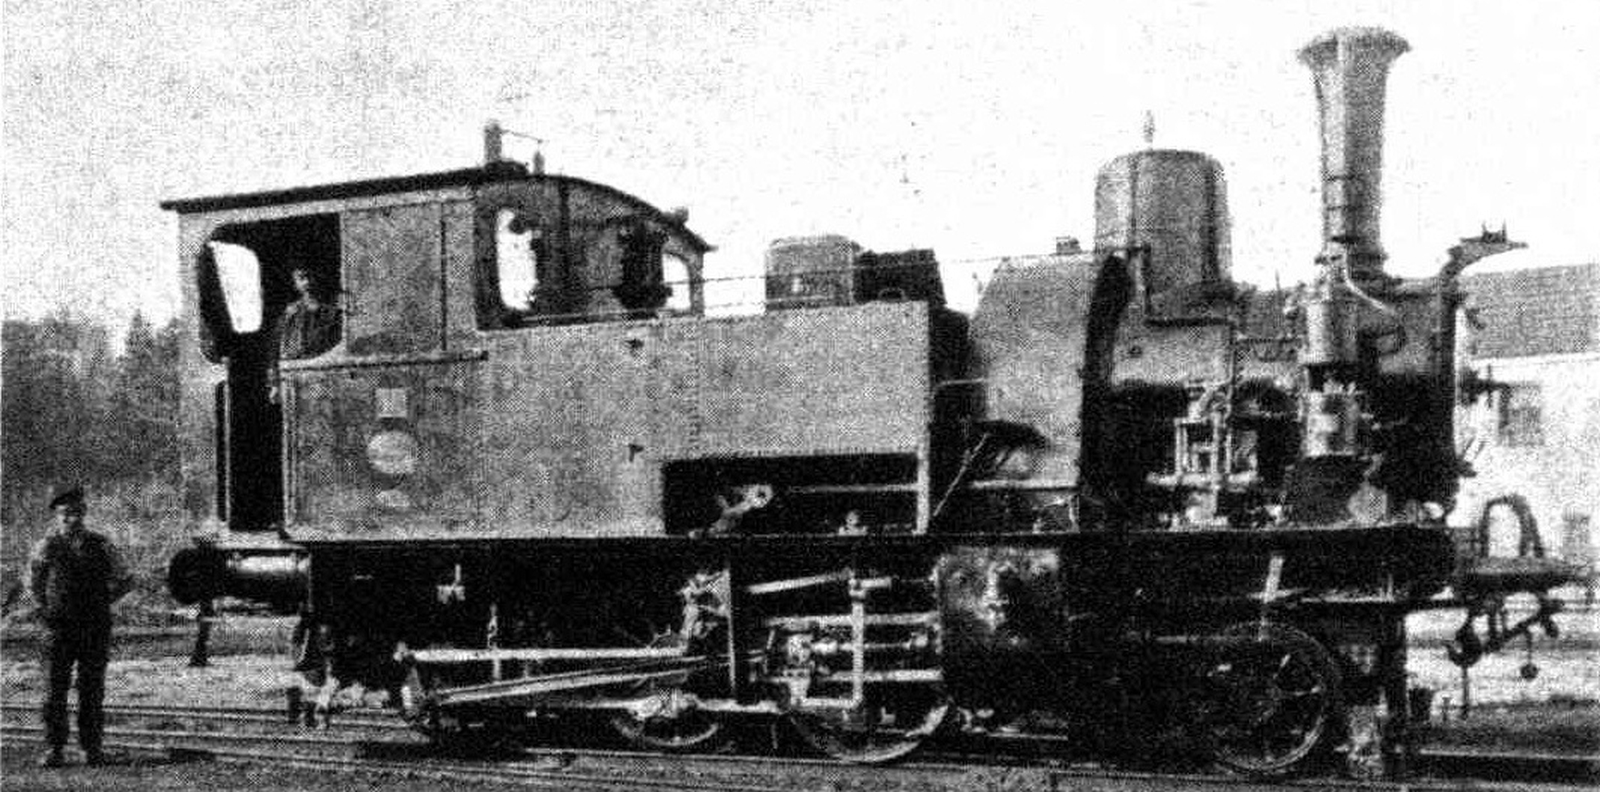 No. 18 in January 1903